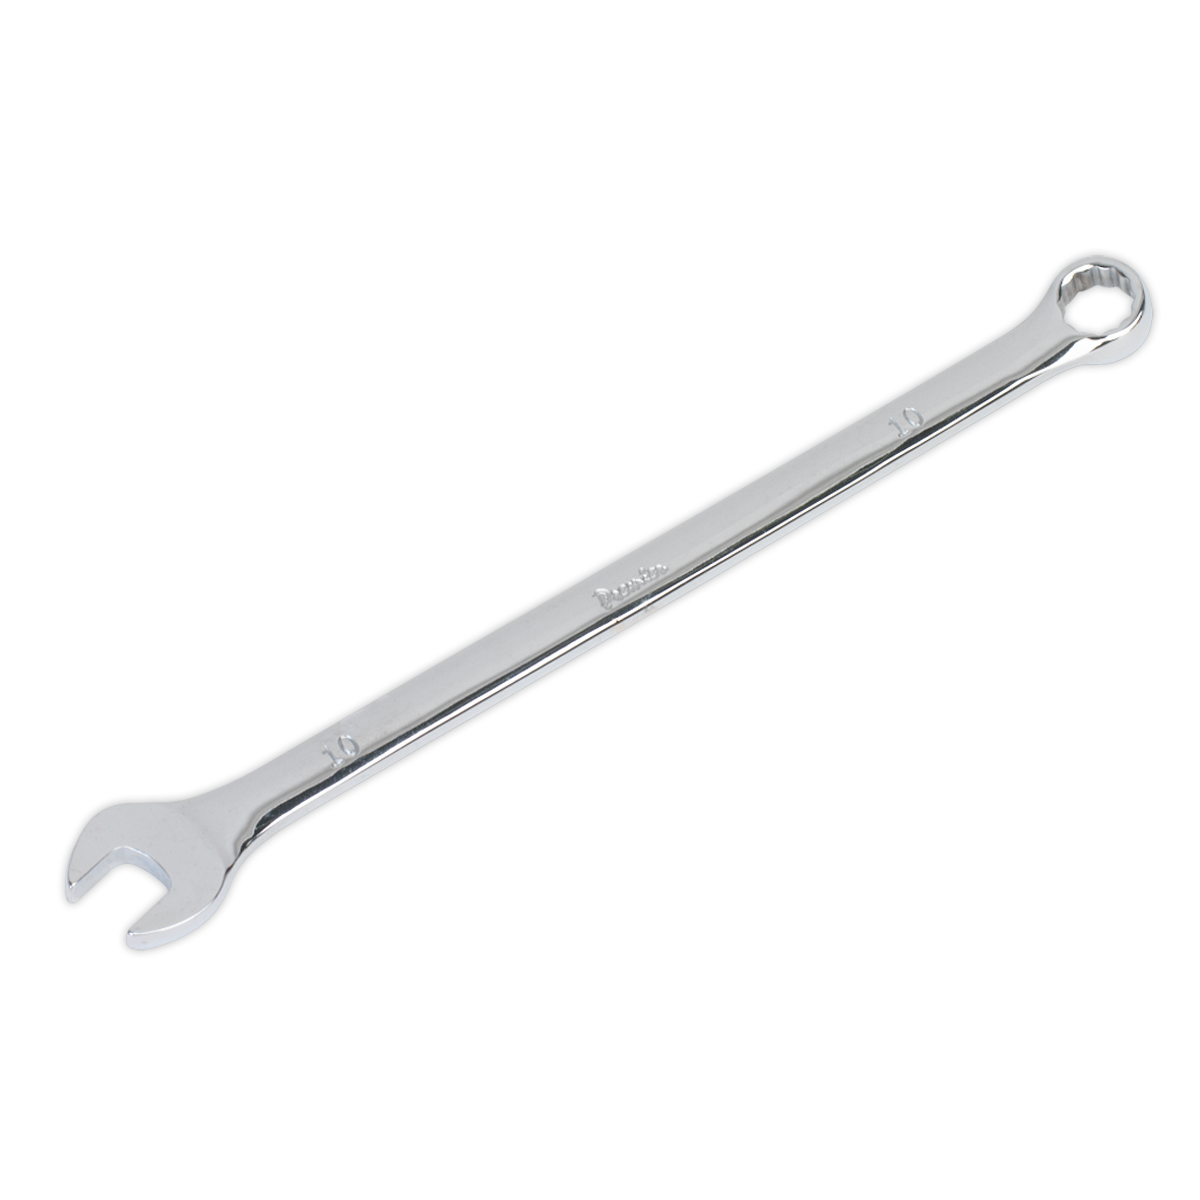 SEALEY - AK6310 Combination Spanner Extra-Long 10mm to 19mm